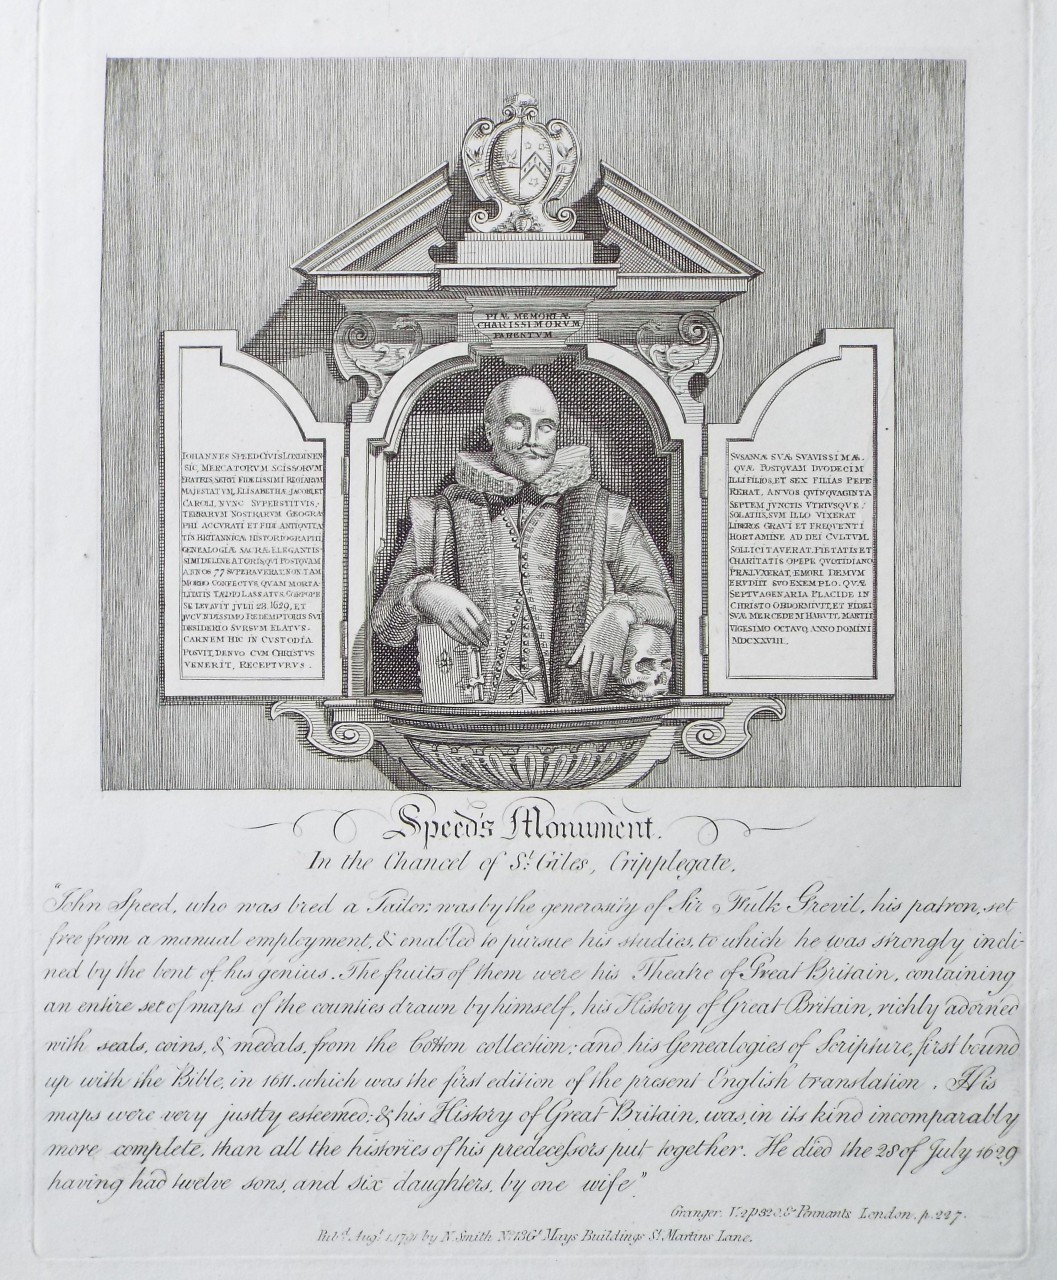 Print - Speed's Monument In the Chancel of St. Giles, Cripplegate.